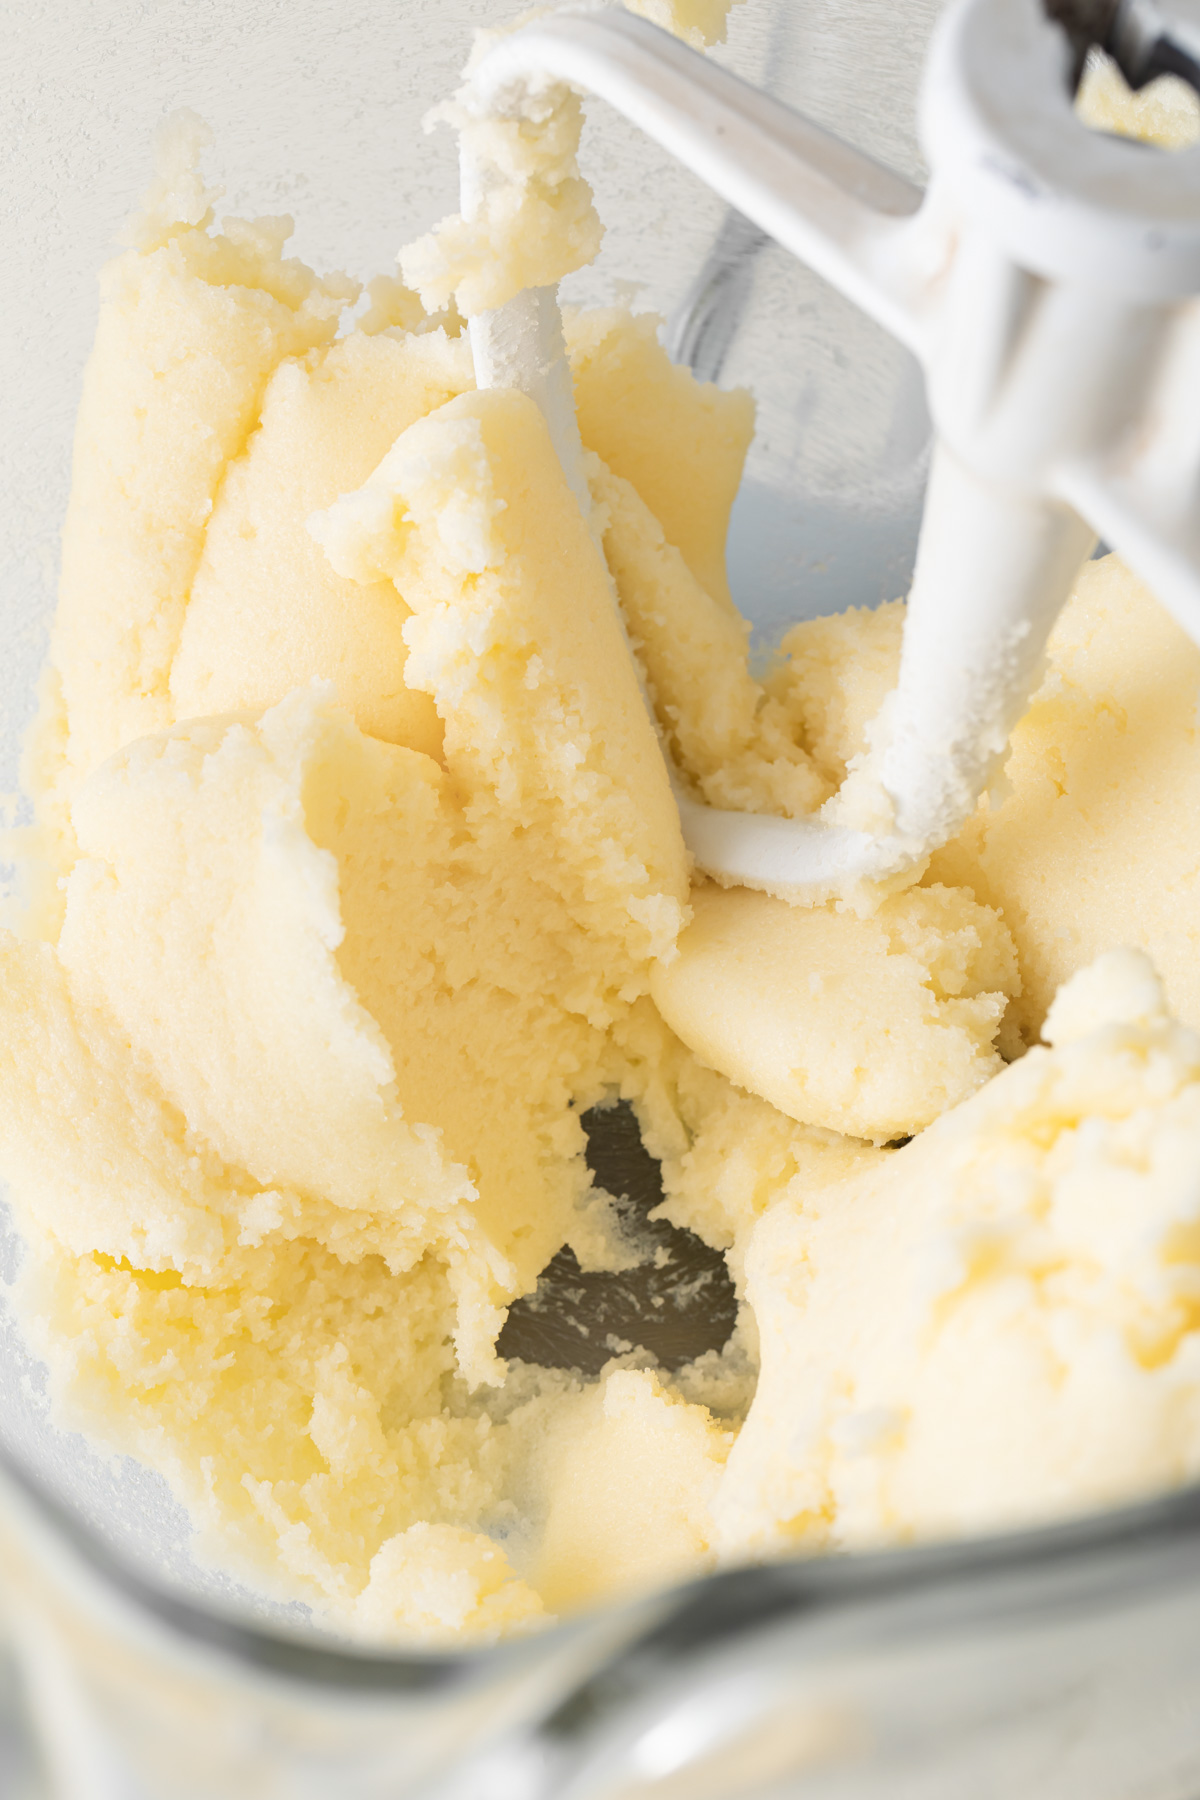 Creaming together butter and sugar in a stand mixer
